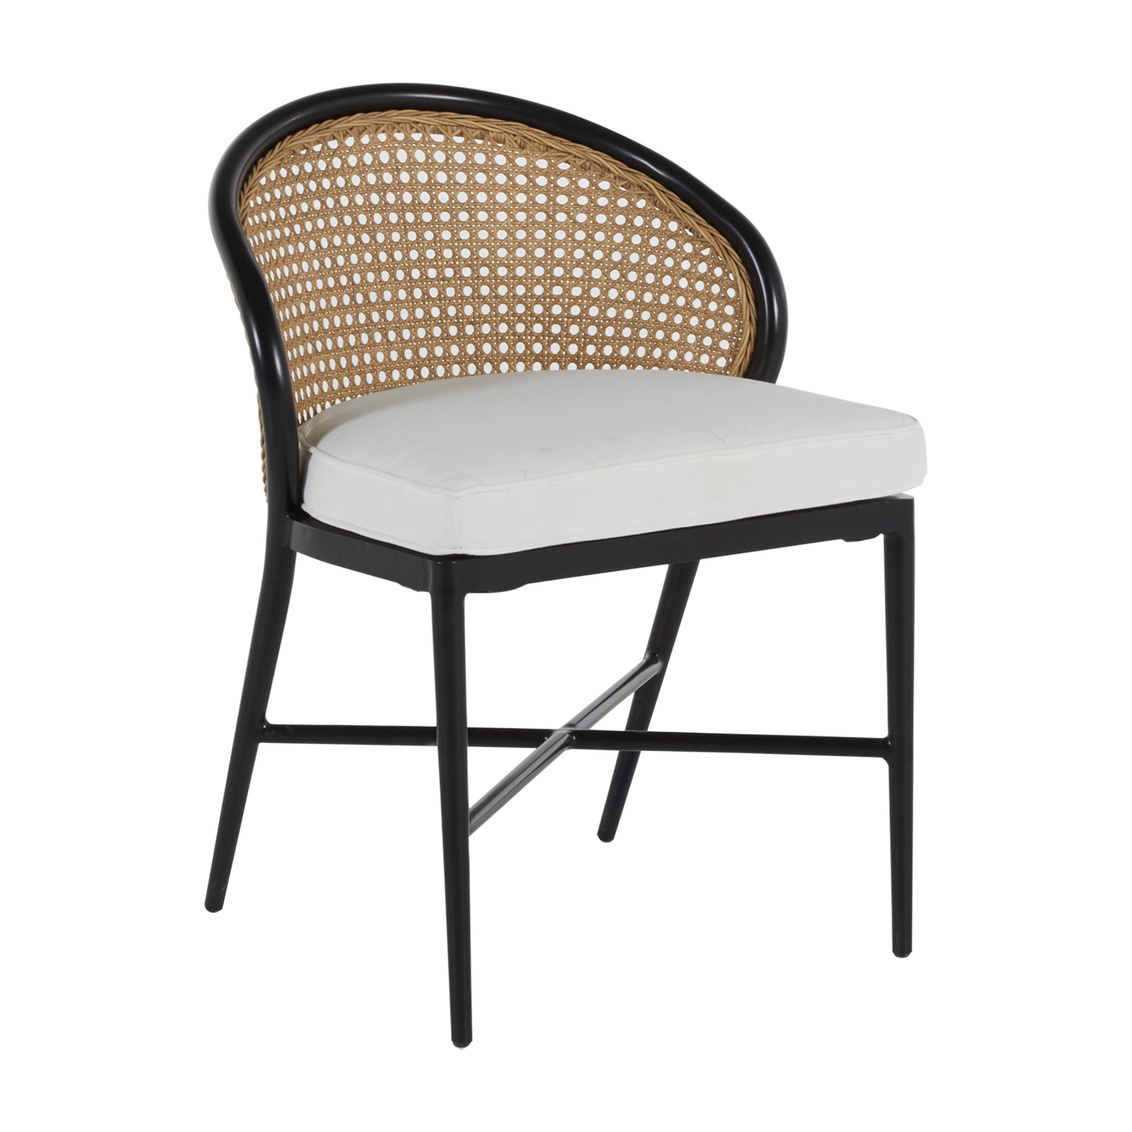 havana side chair in black/natural resin – frame only product image